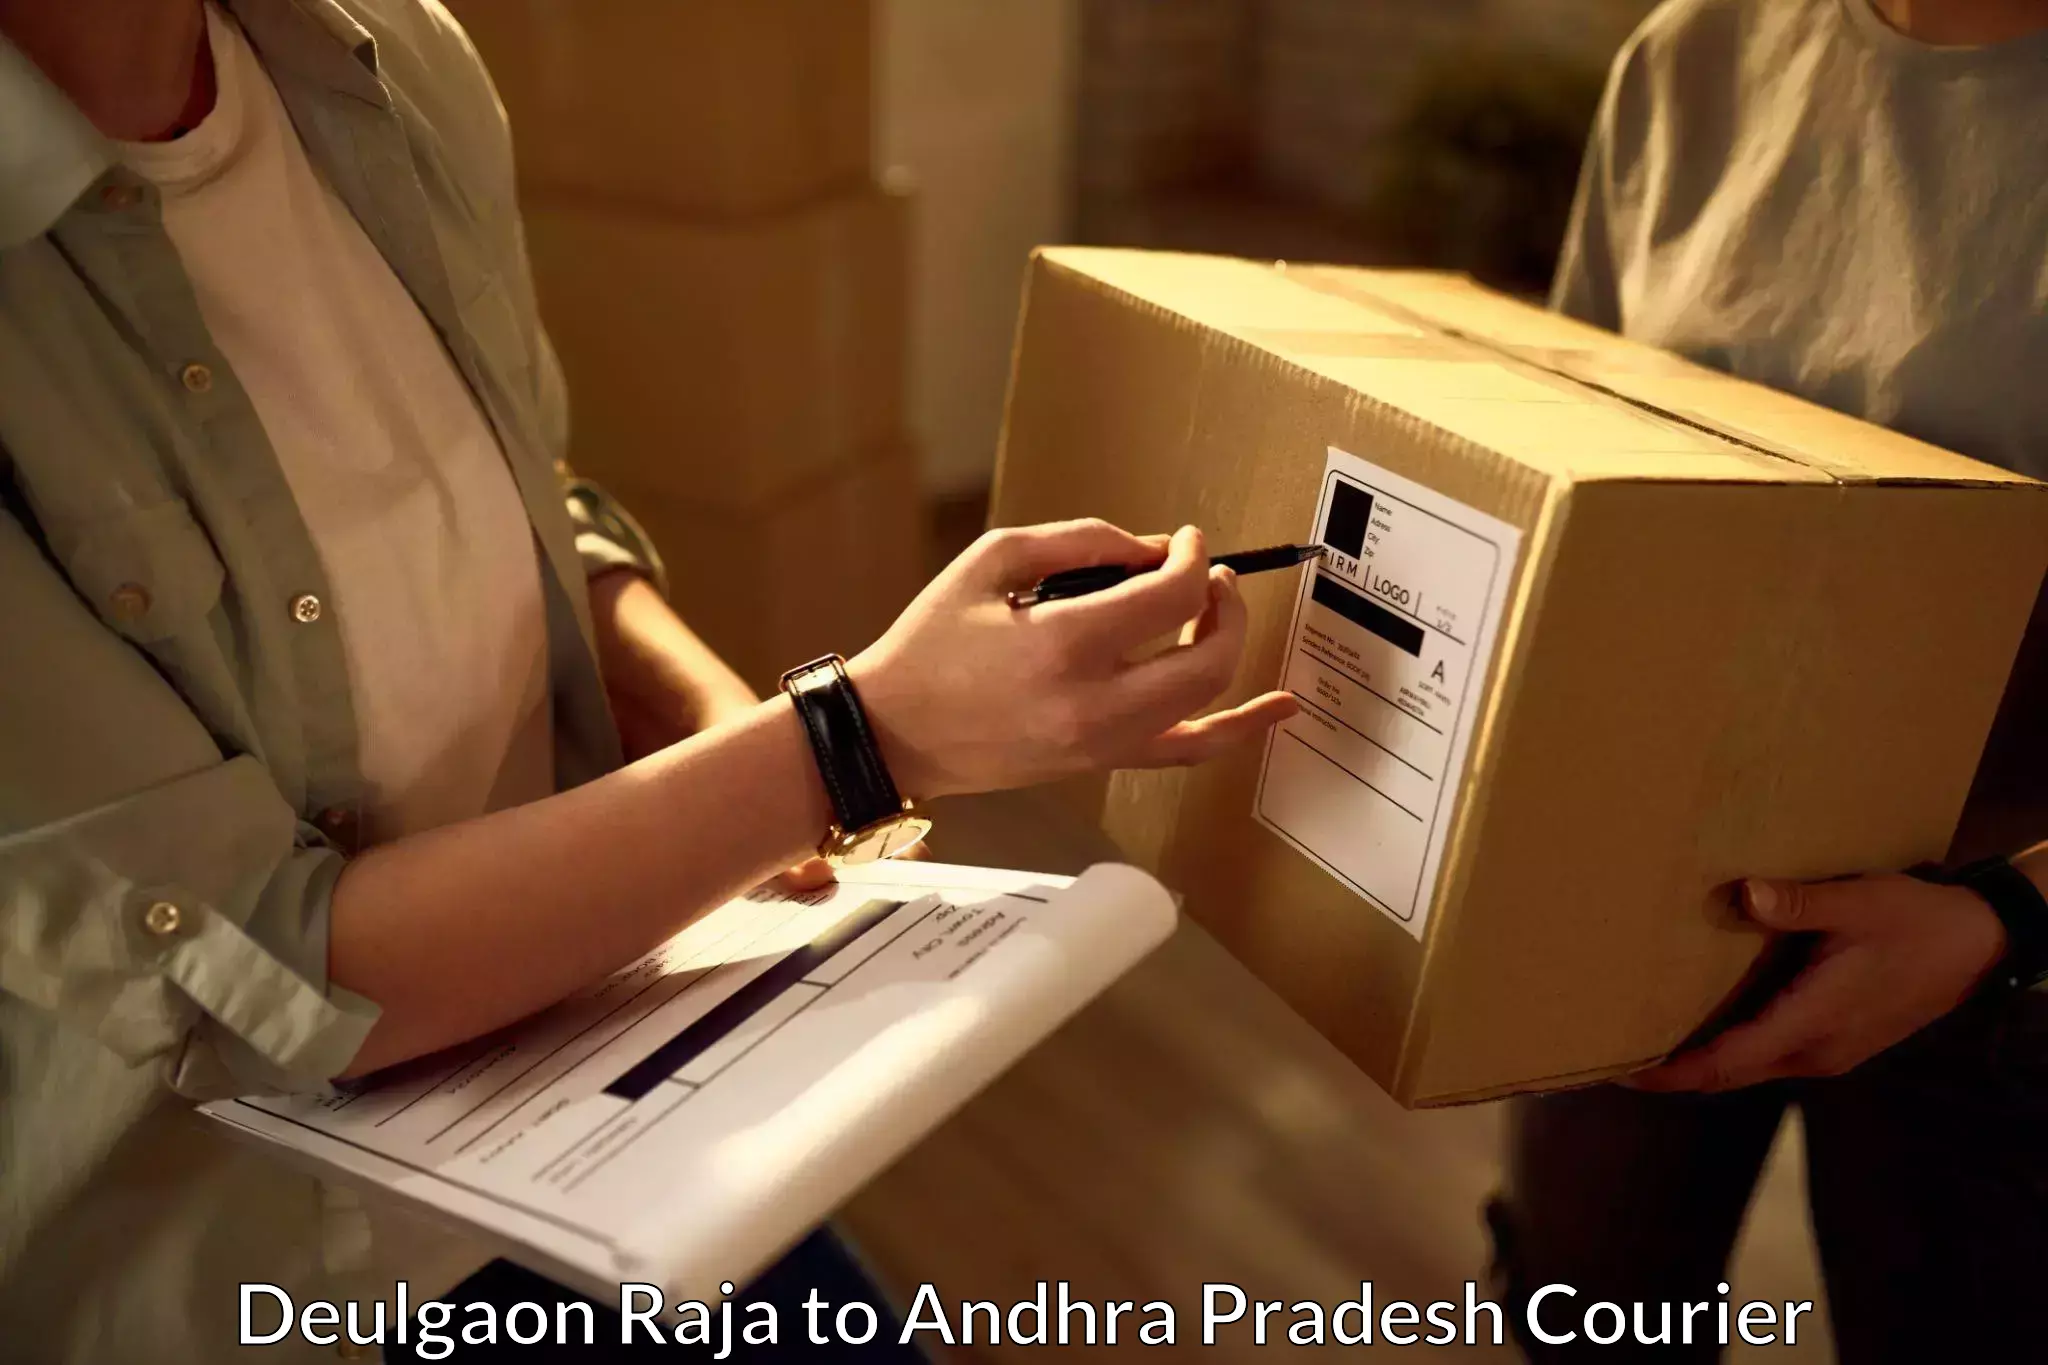 State-of-the-art courier technology Deulgaon Raja to Etcherla